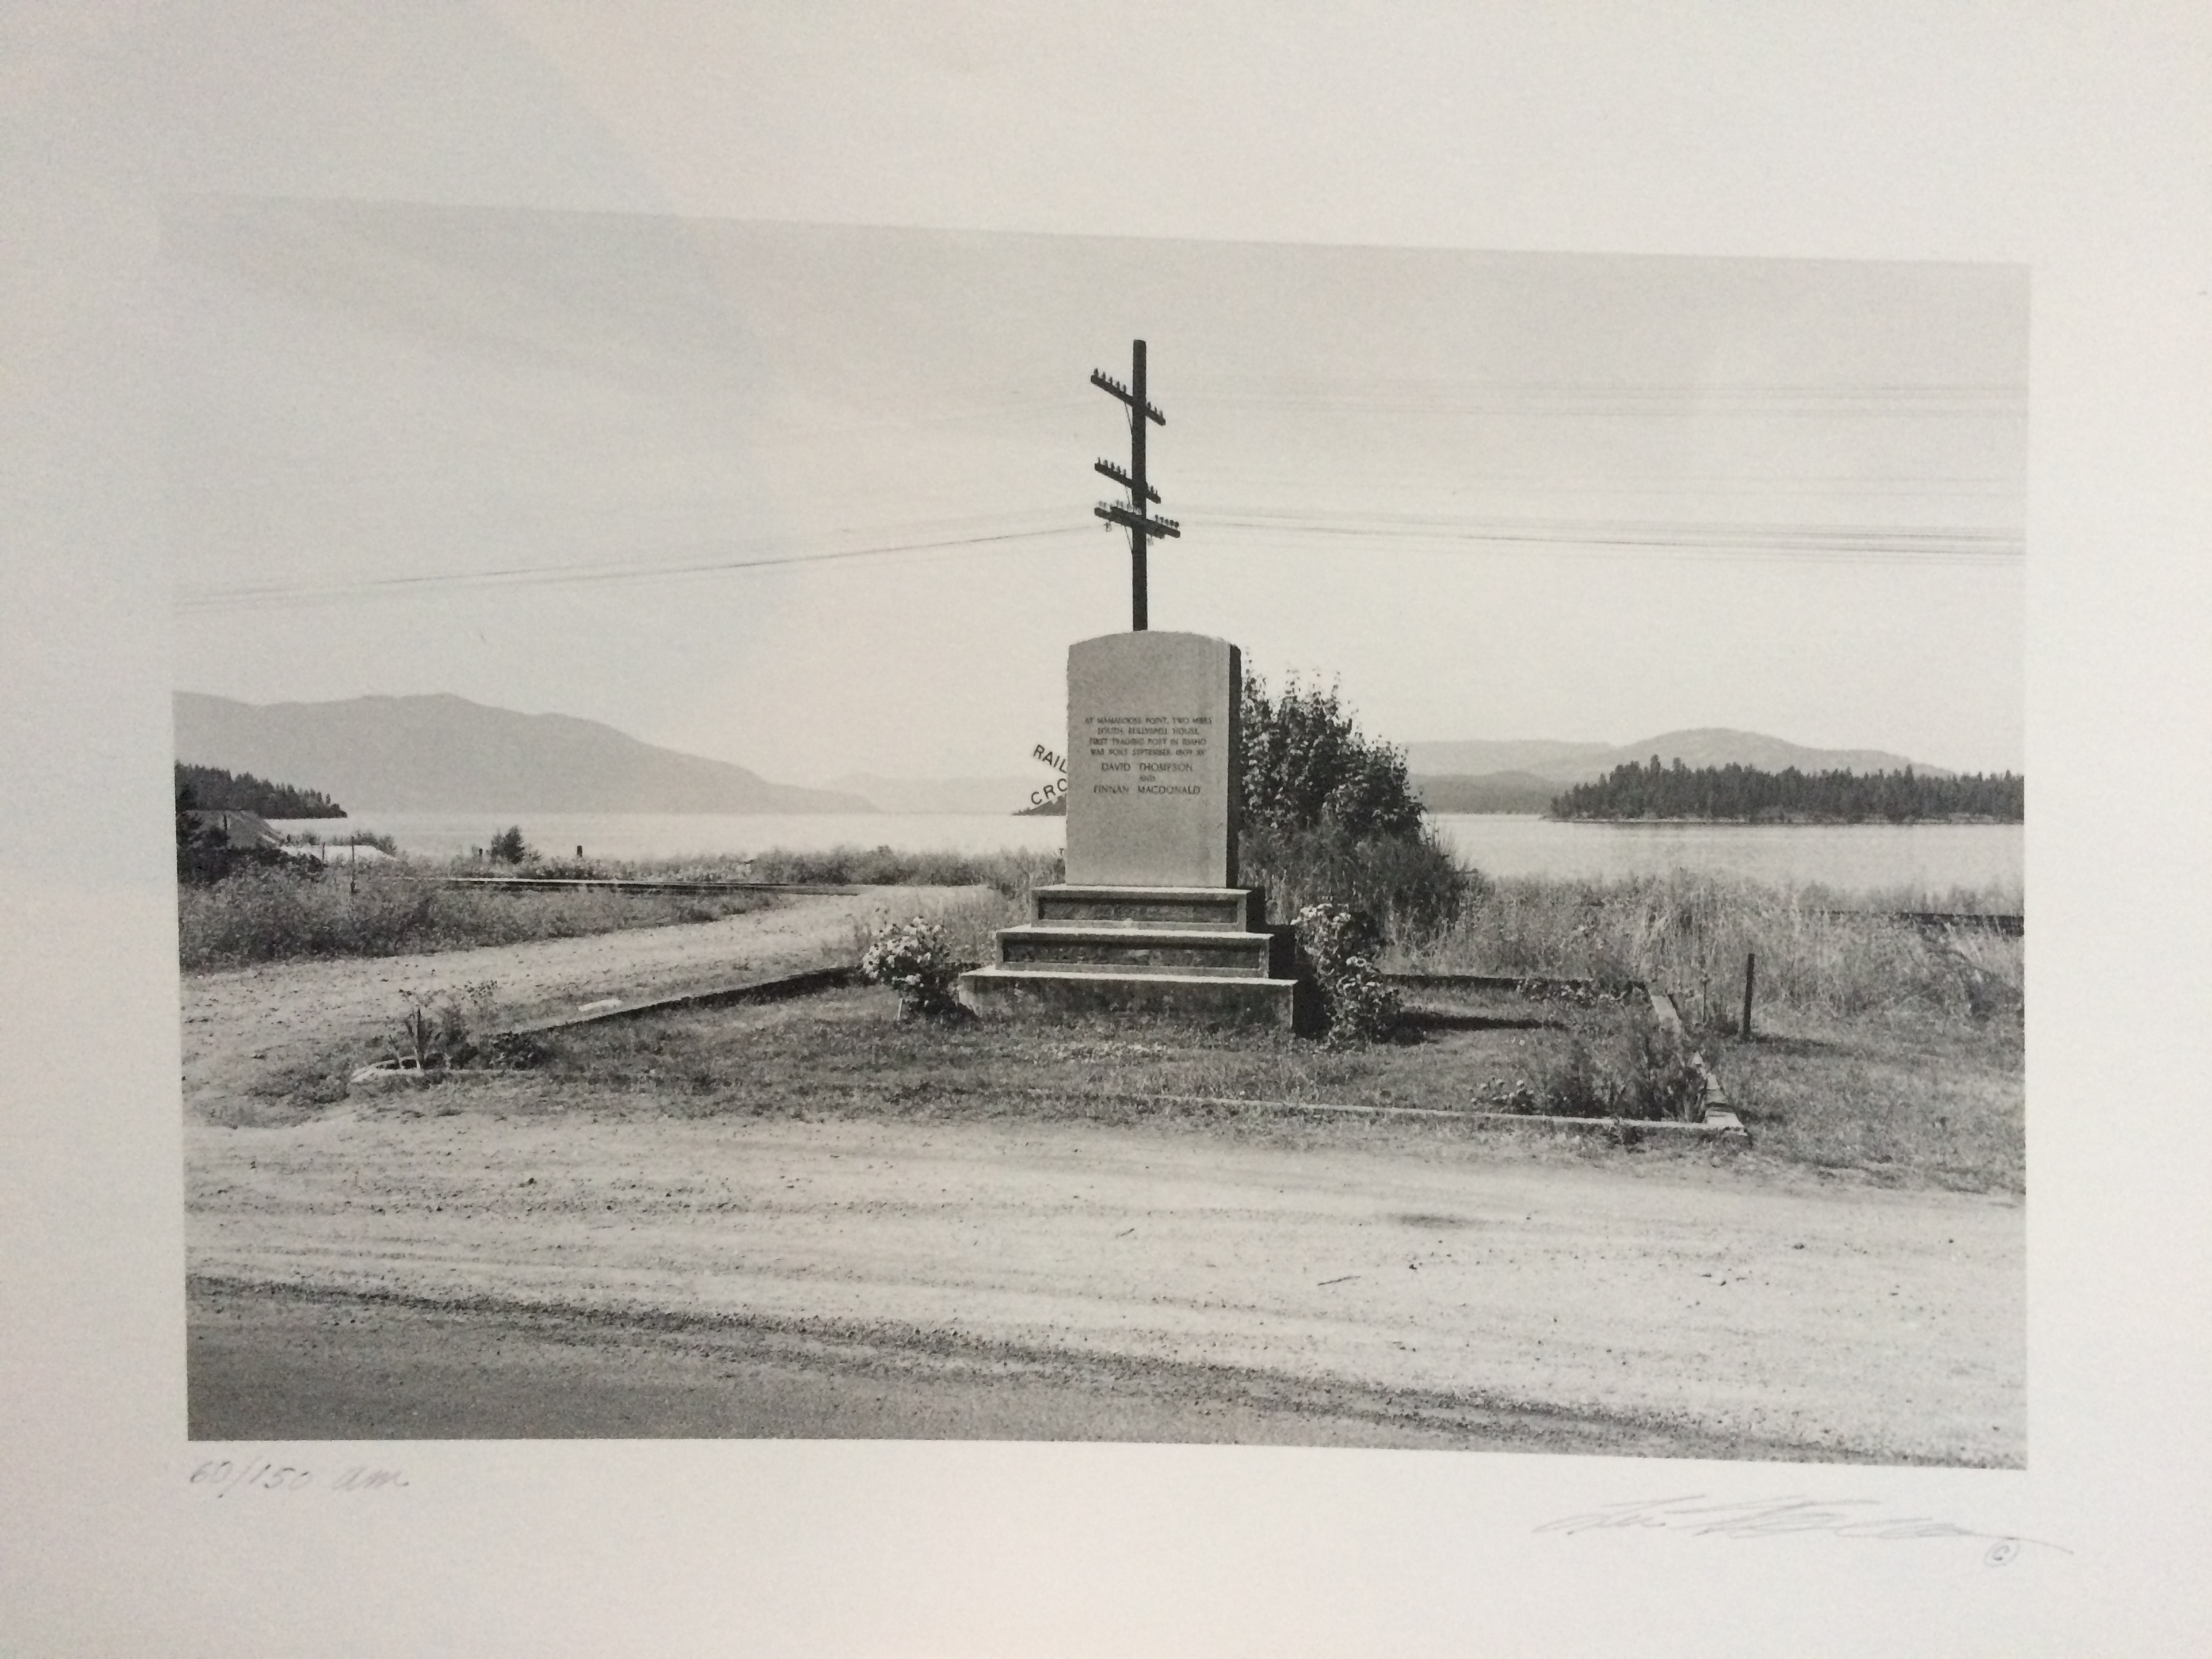 (FRIEDLANDER, LEE). Friedlander, Lee & Leslie George Katz. With a brief text by Walt Whitman - LEE FRIEDLANDER: THE AMERICAN MONUMENT - BOXED SPECIAL EDITION WITH A SIGNED SILVER GELATIN PRINT